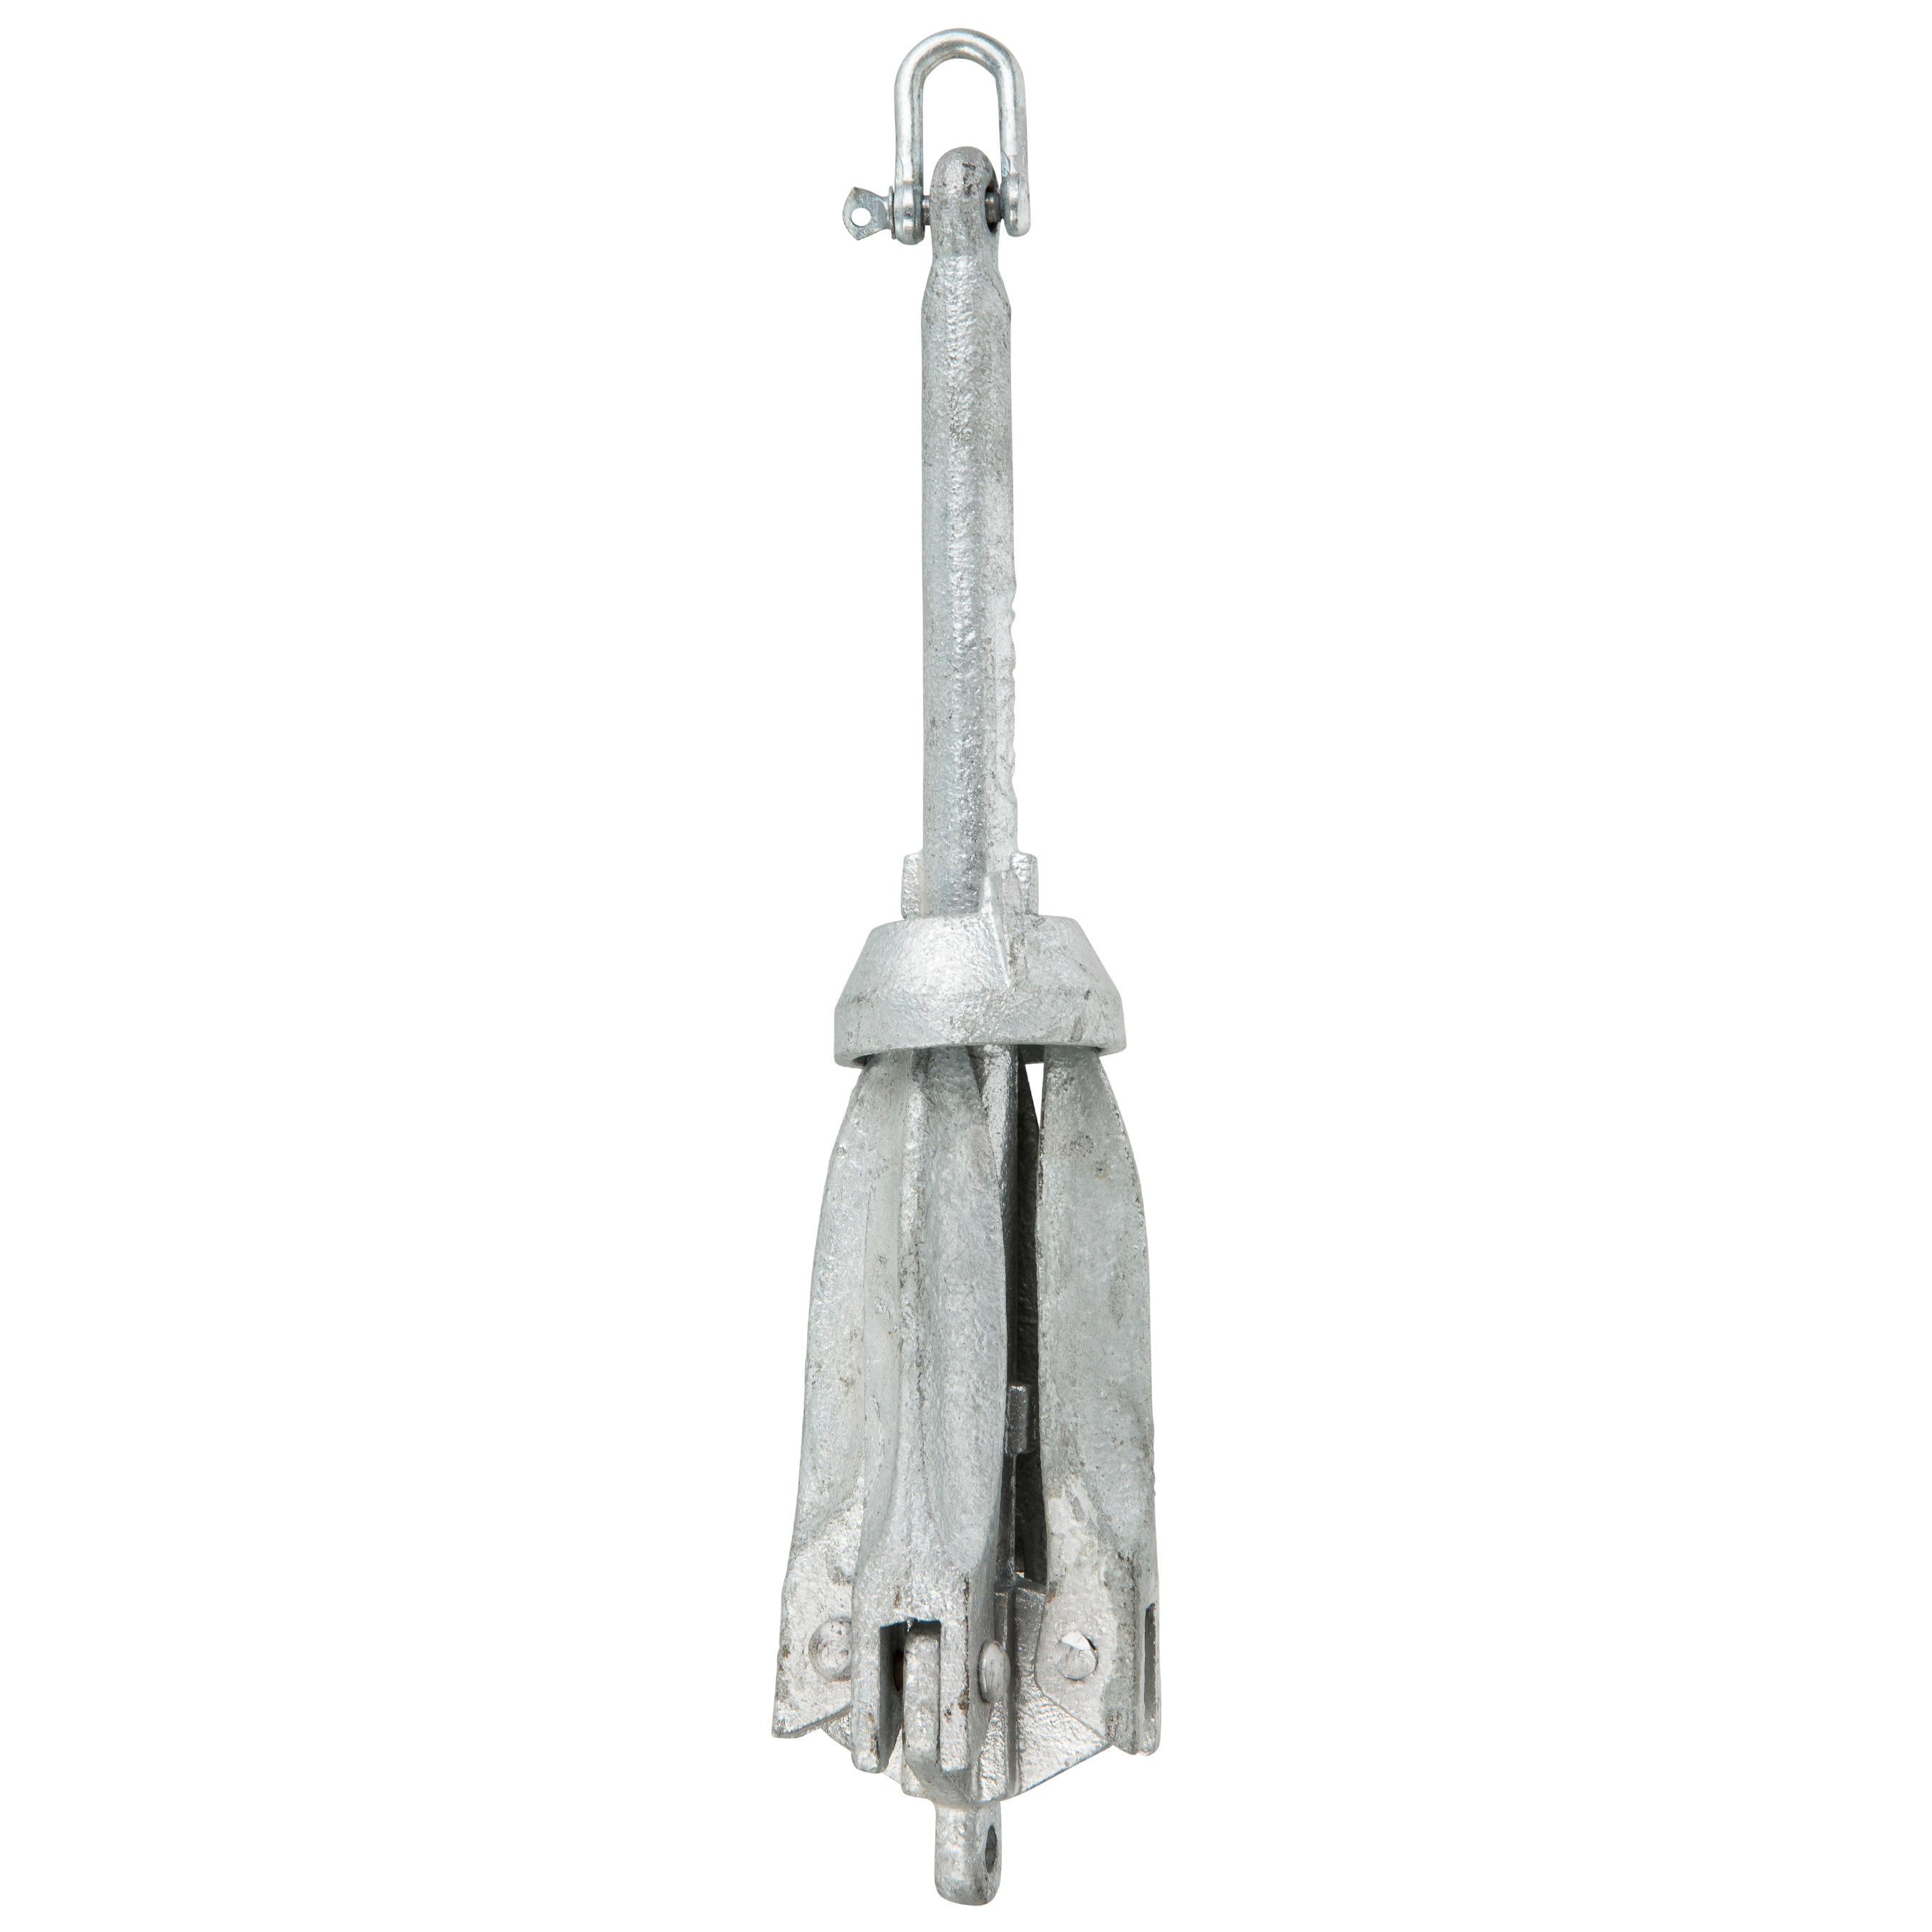 Grapnel Anchor for Small Boats and Kayaks 1.4 kg 2/5